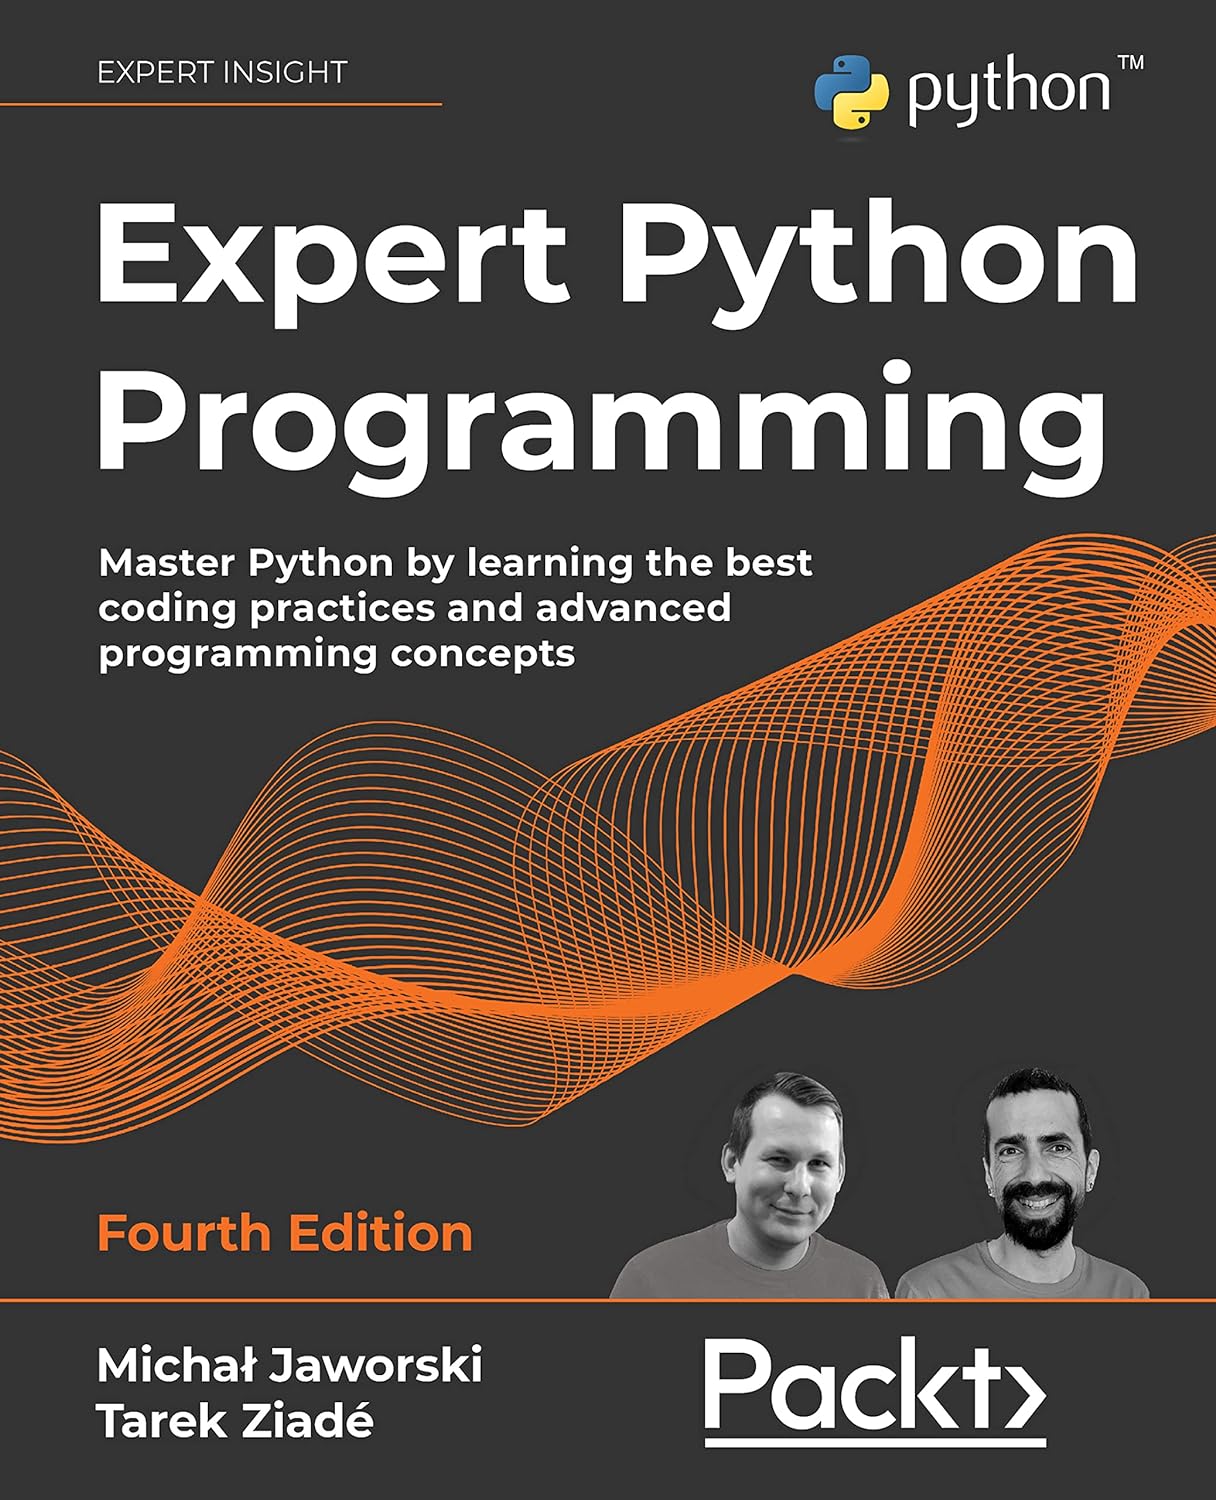 (Ebook PDF)Expert Python Programming: Master Python by learning the best coding practices and advanced programming concepts, 4th Edition by Michał Jaworski